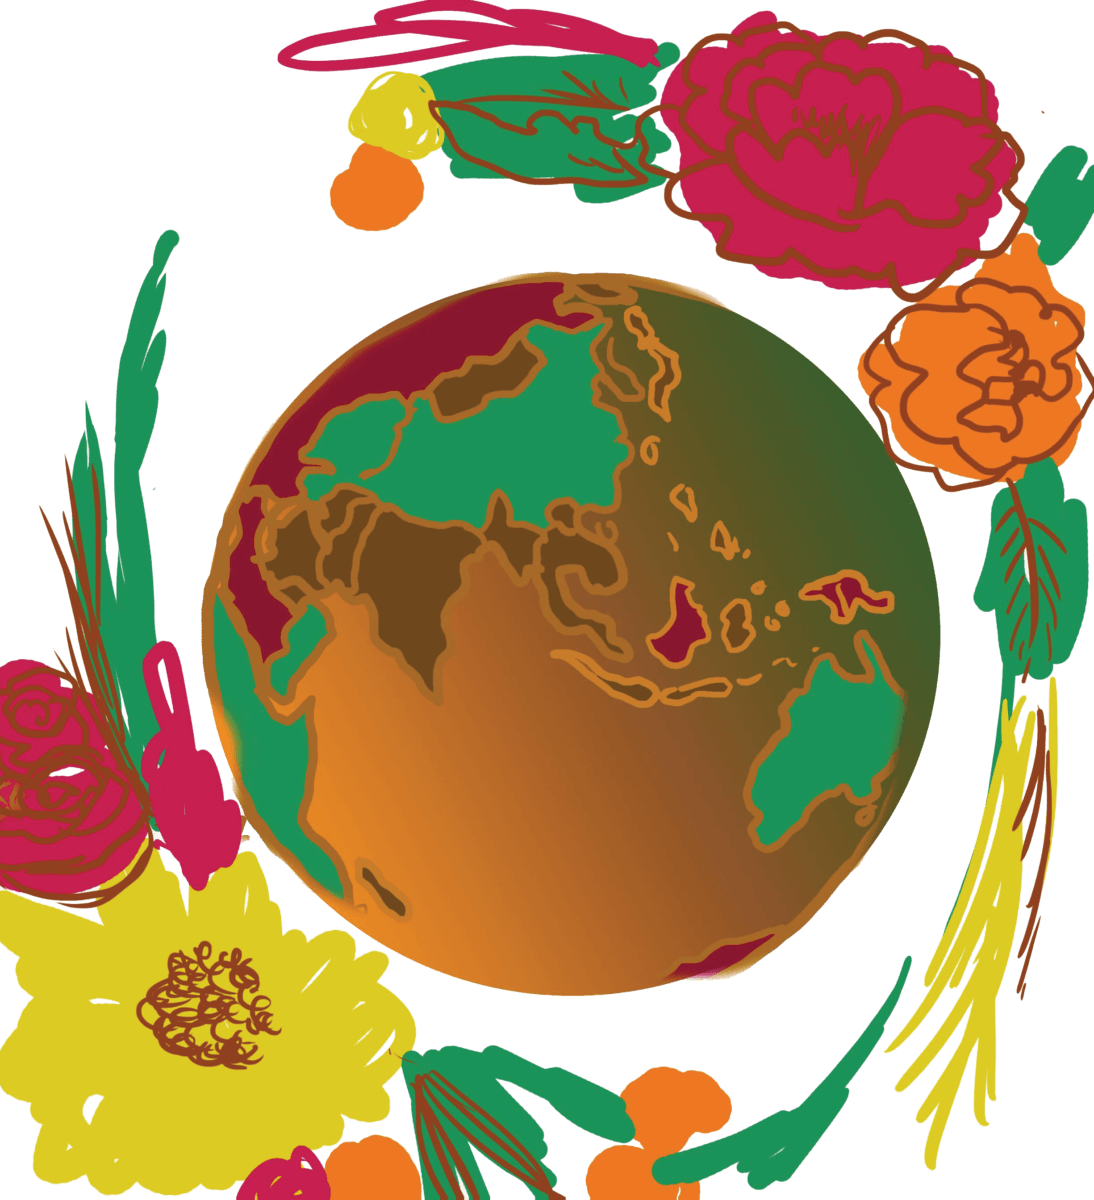 A colourful globe surrounded by flowers